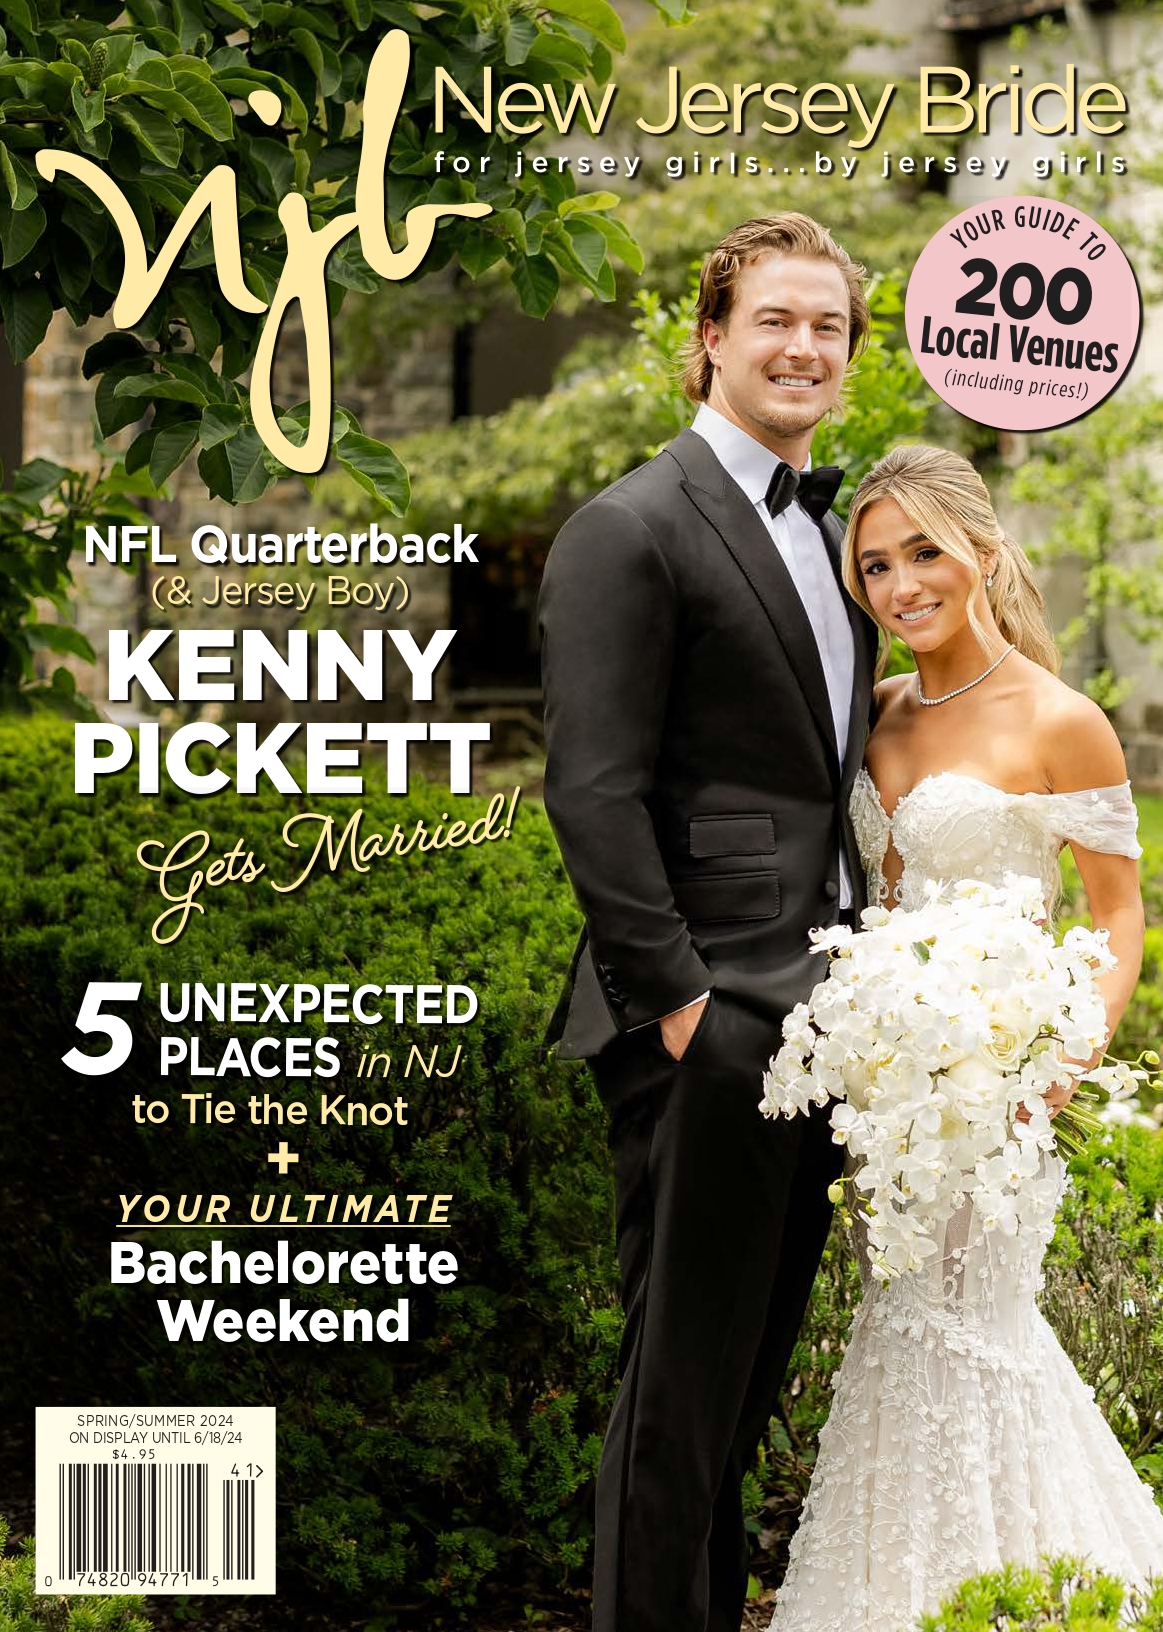 Kenny & Amy Pickett's wedding on the cover of New Jersey Bride.